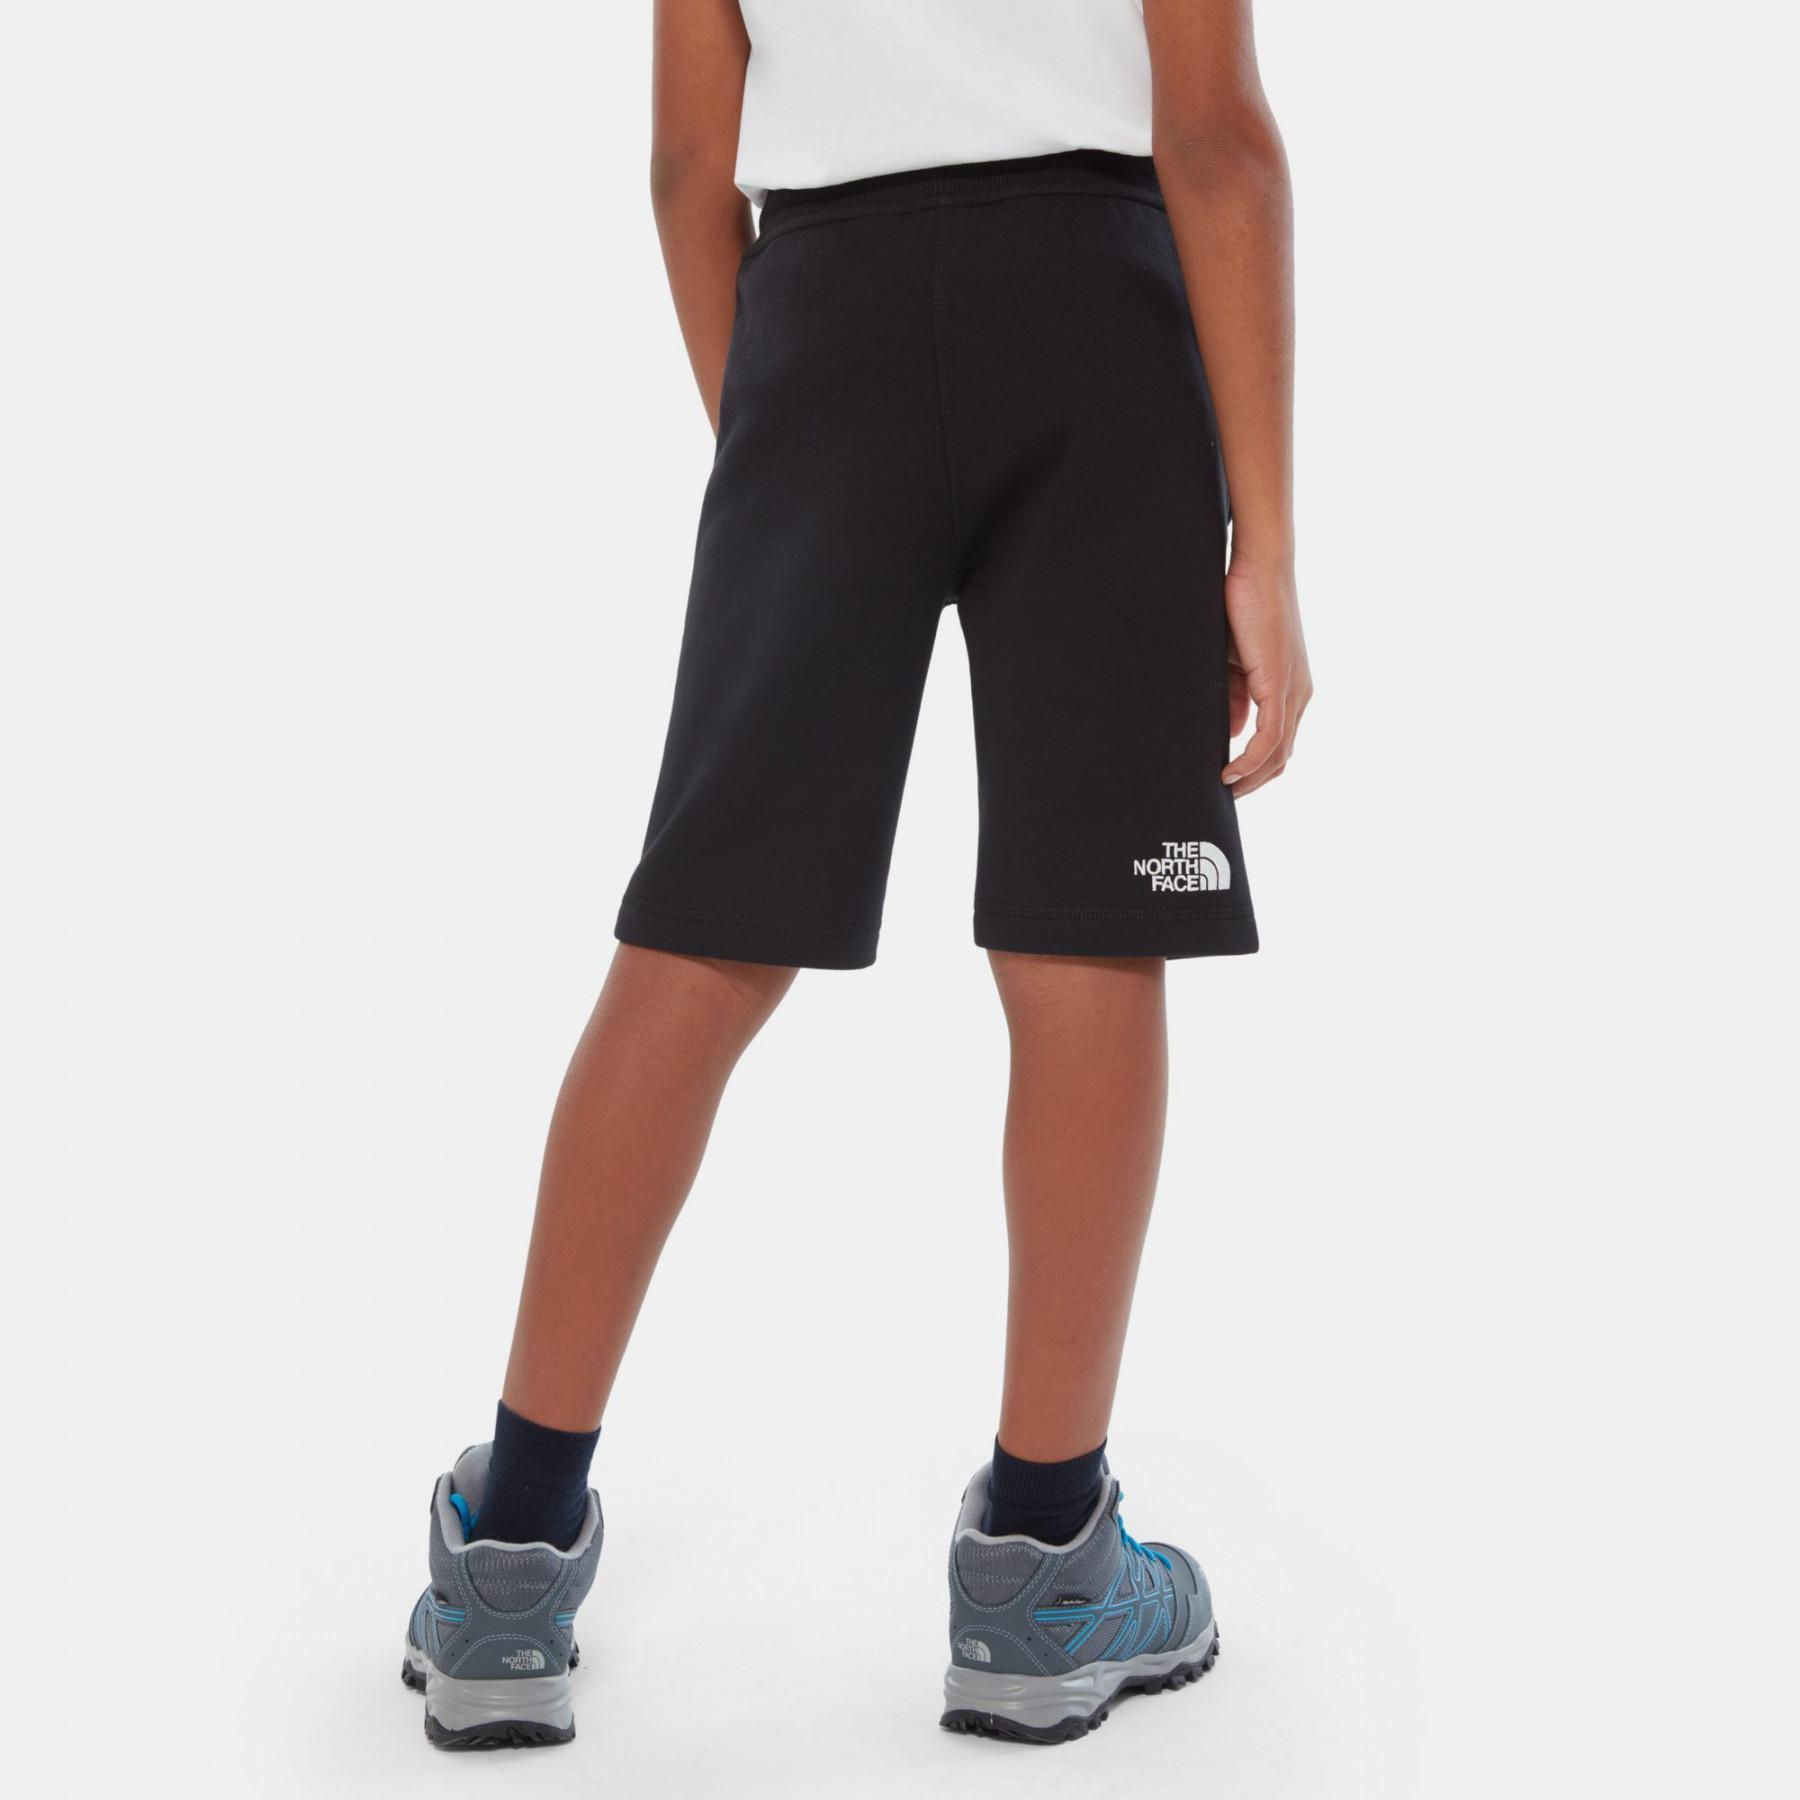 Children's shorts The North Face